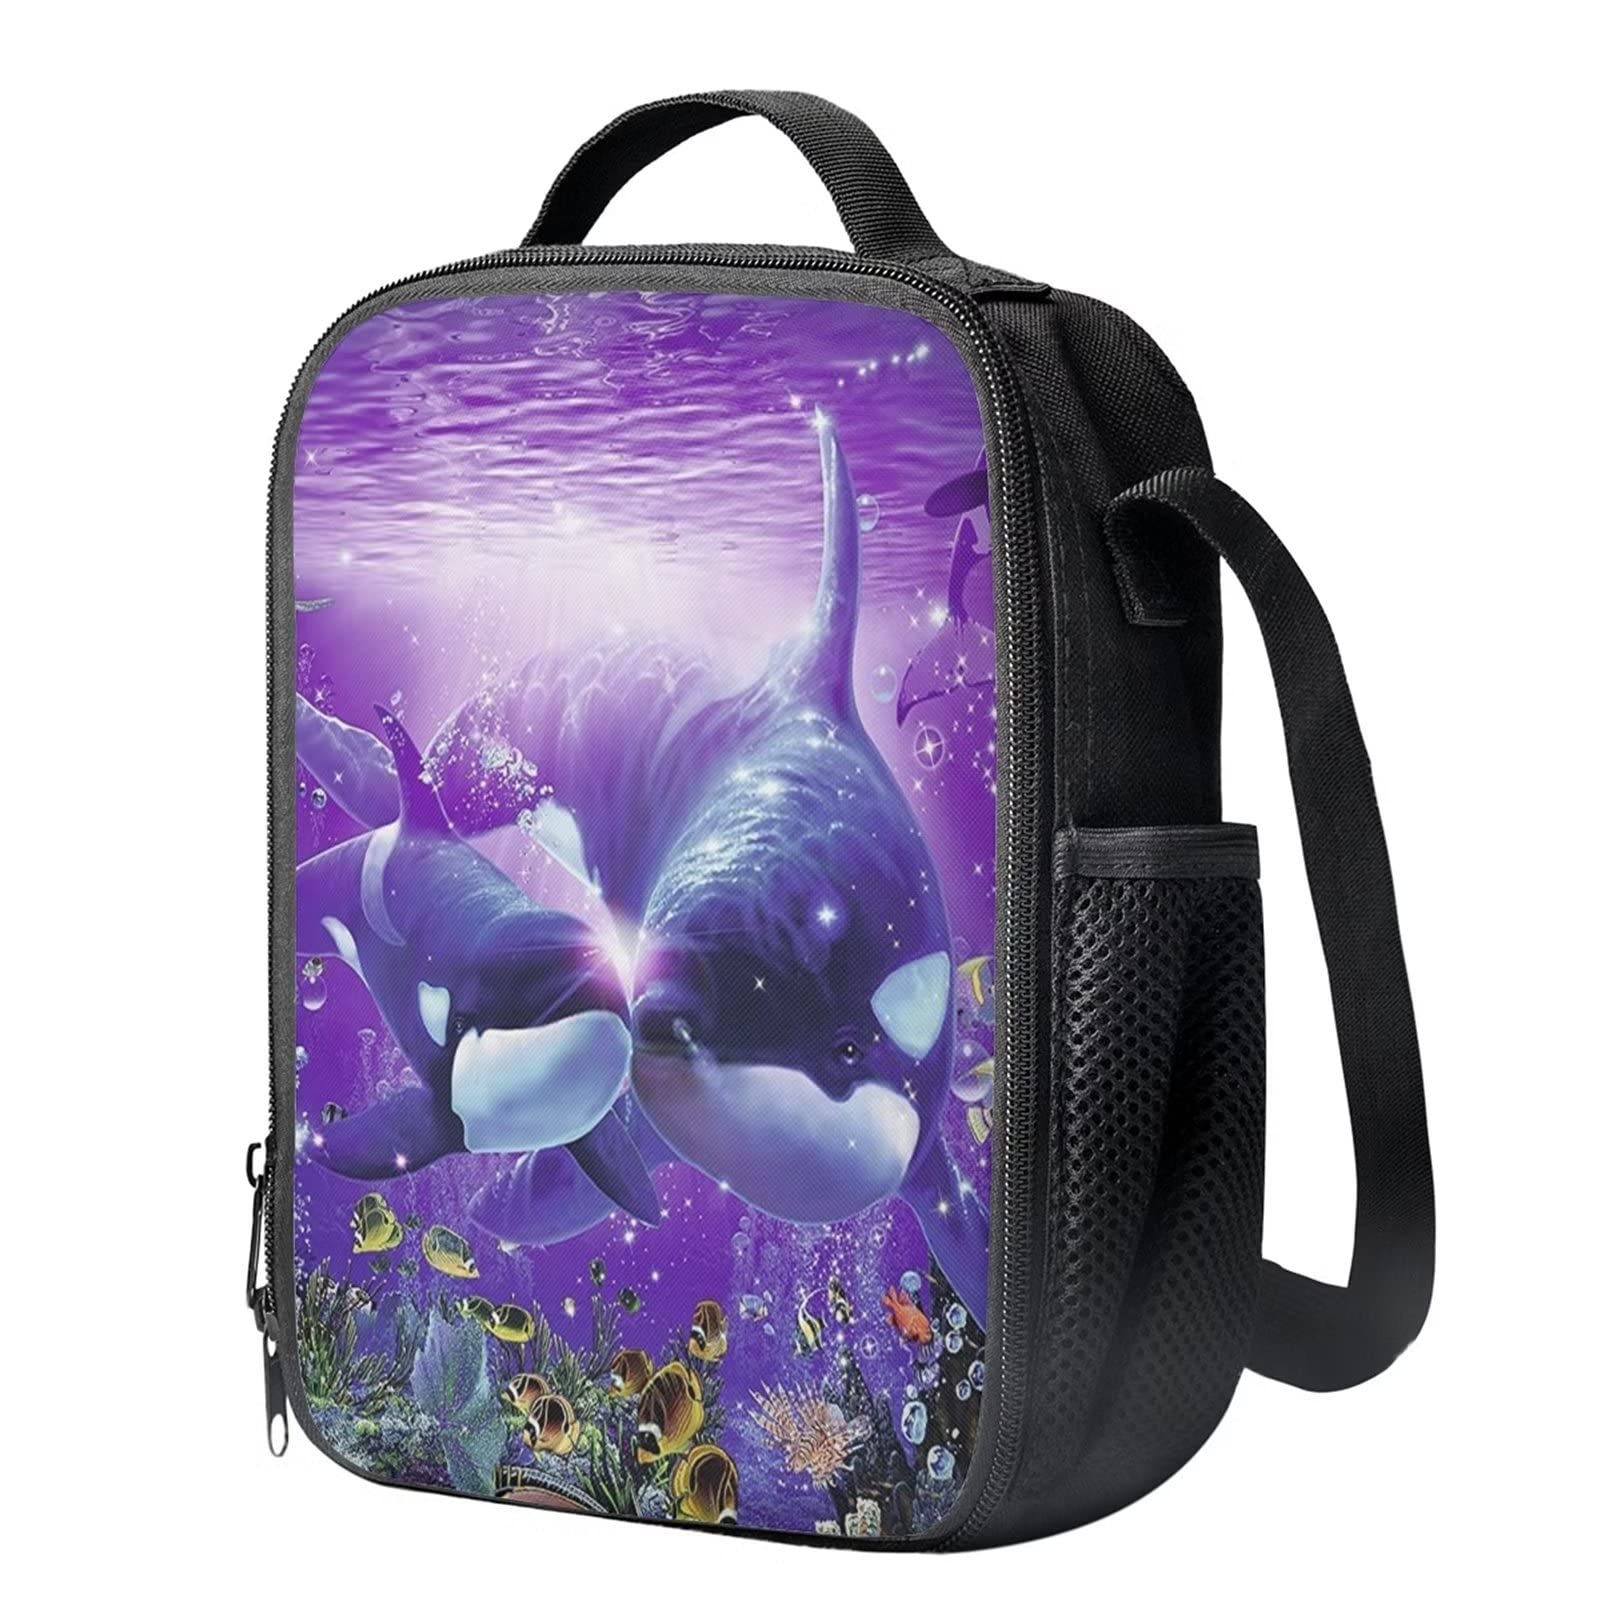 ZFRXIGN Killer Whale Lunch Bag Girly Stuff Insulated Lunch Box Tote Bag Purple Lunch Holder for Beach, Party, Boating, Office, Fishing, Picnic - Orca